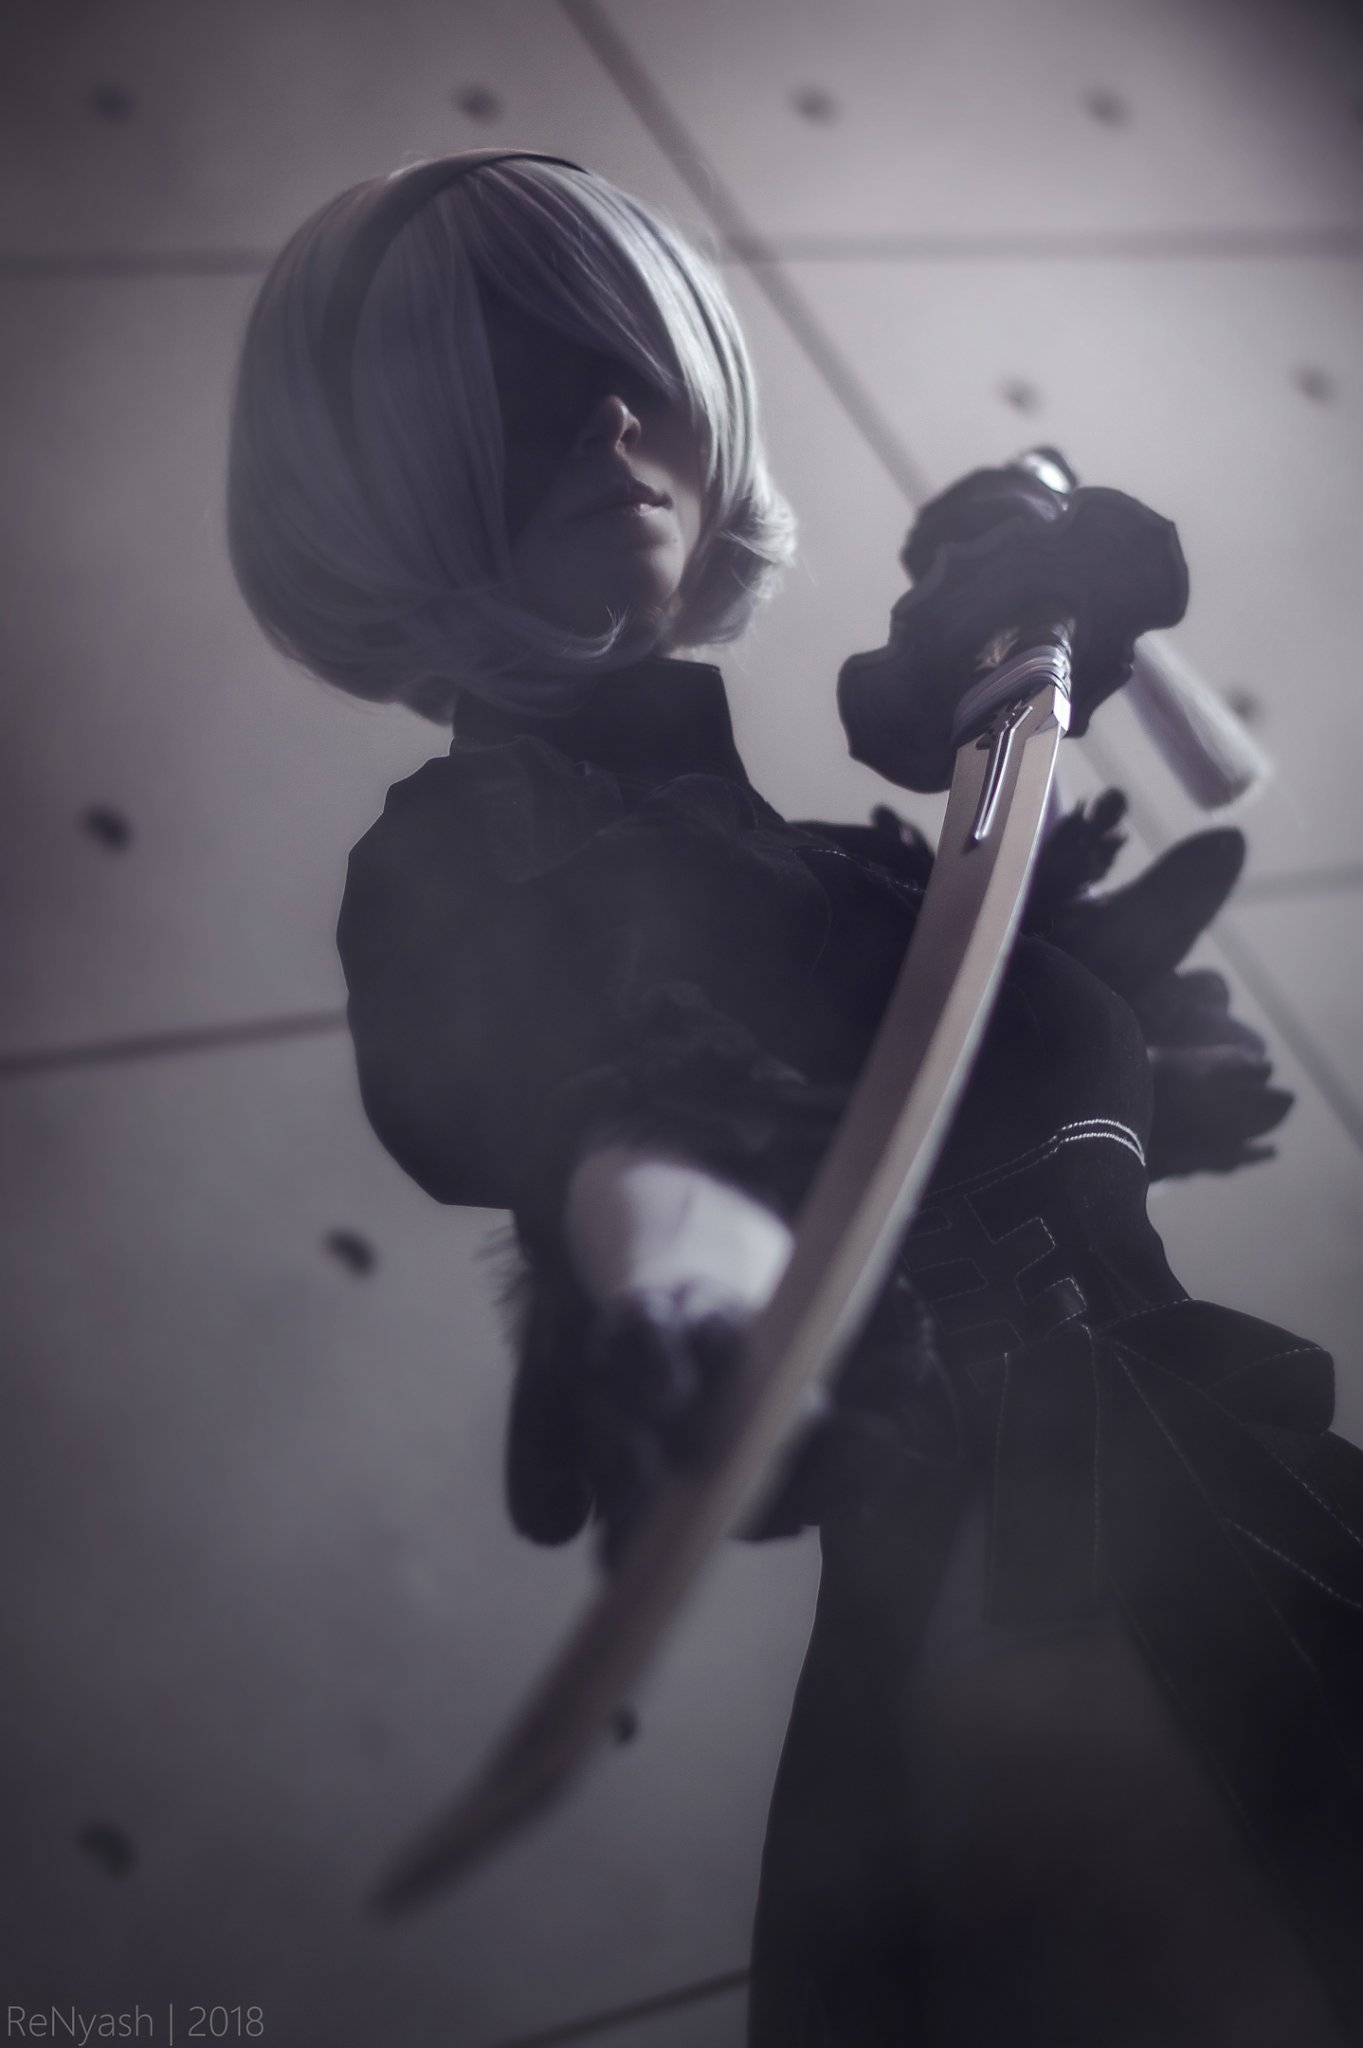 Me Sunako It Is Very Difficult To Pose In Heels With Closed Eyes The Sense Of Space Is Lost Did You Know Nierautomata Nier 2b Cosplay Game ニーア オートマタ コスプレ